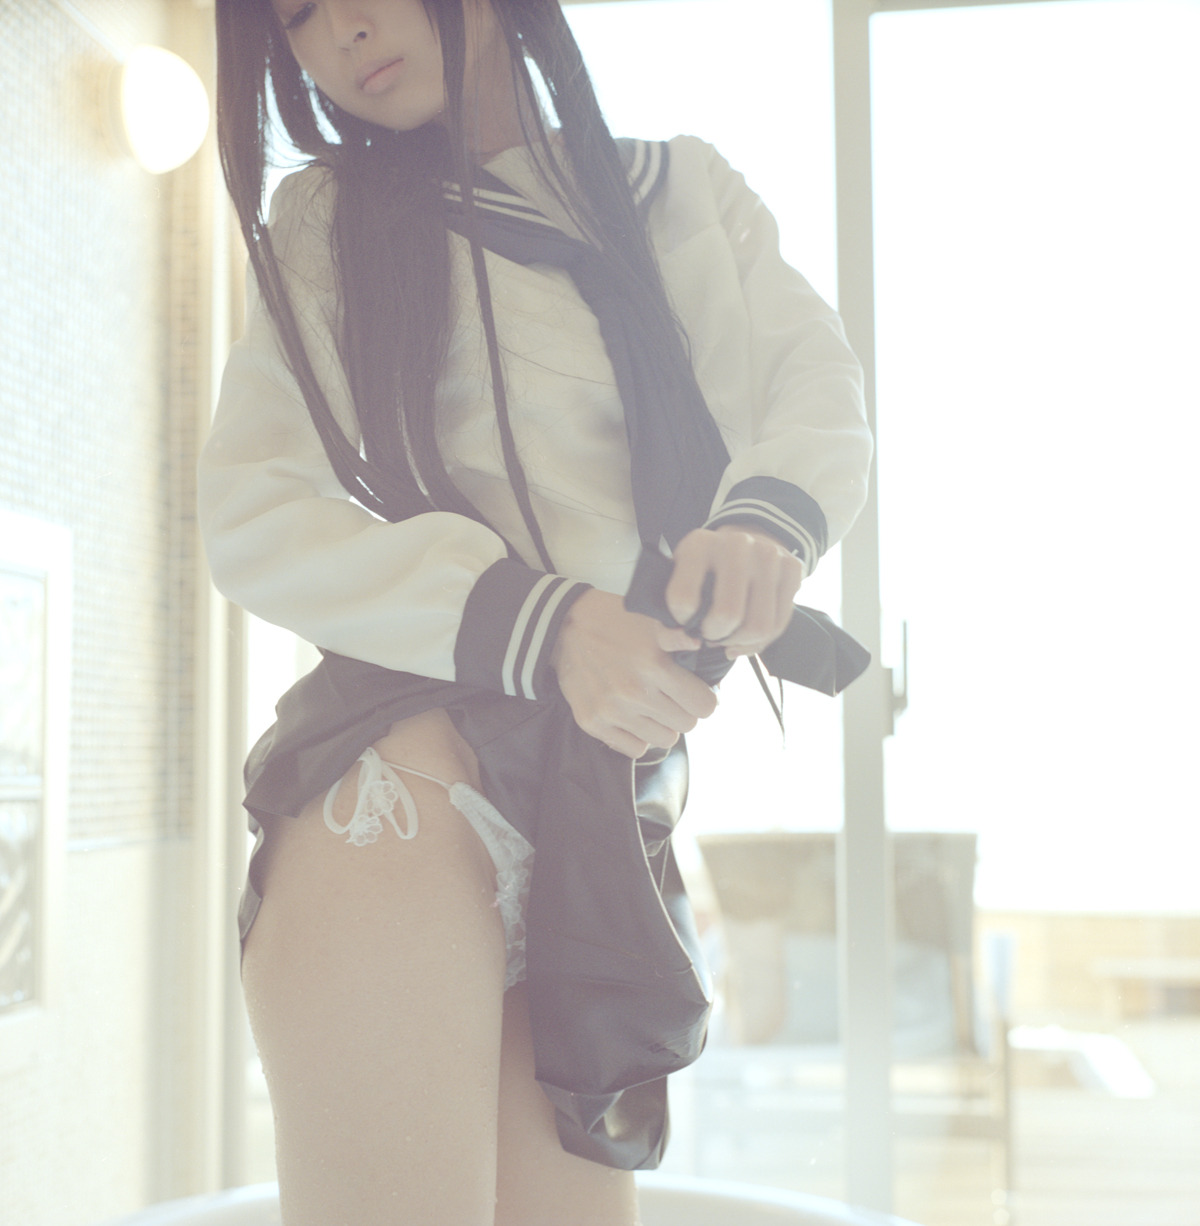 hot-cosplay:  Awesome body School Girl Cosplay Set 135 PICS / 89.7 MB DOWNLOAD http://uploaded.net/file/nlq9ncrs/